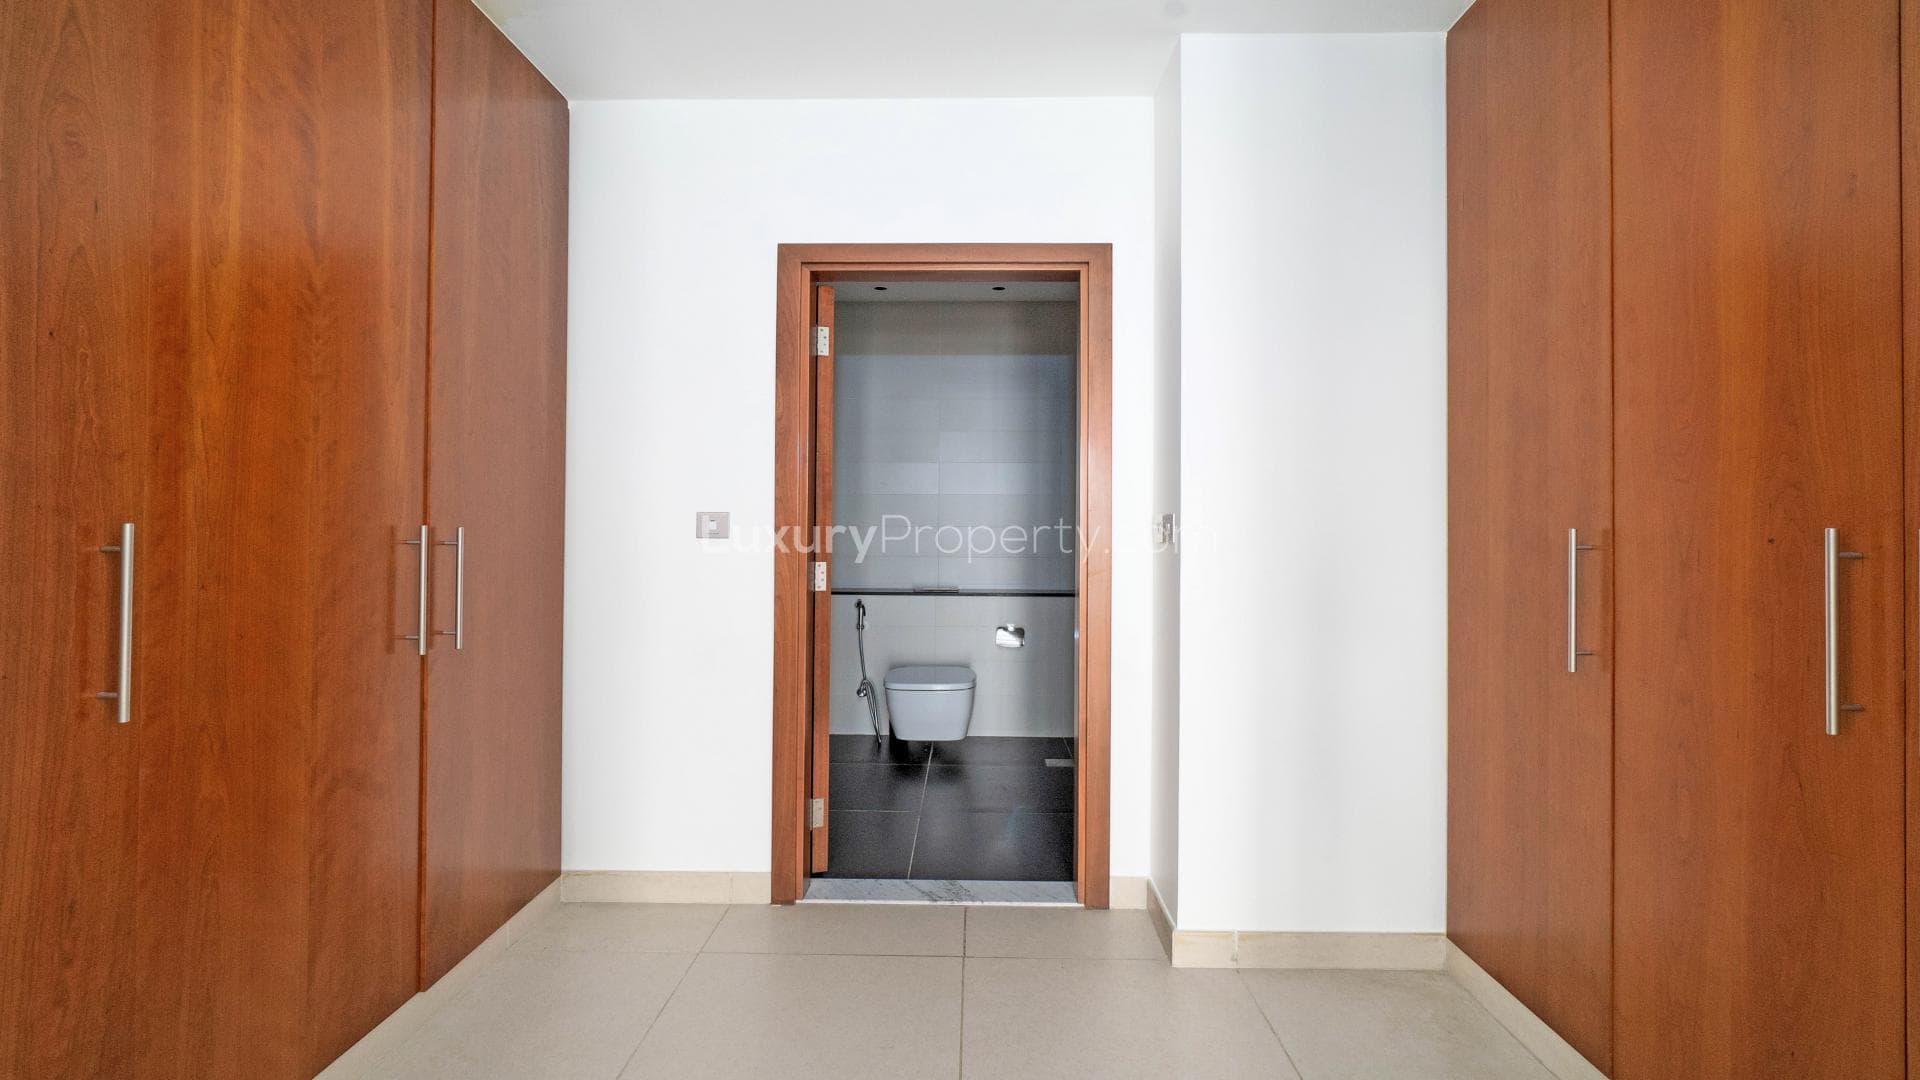 2 Bedroom Apartment For Rent Central Park Tower Lp36083 1a0ecce3997f2e00.jpg